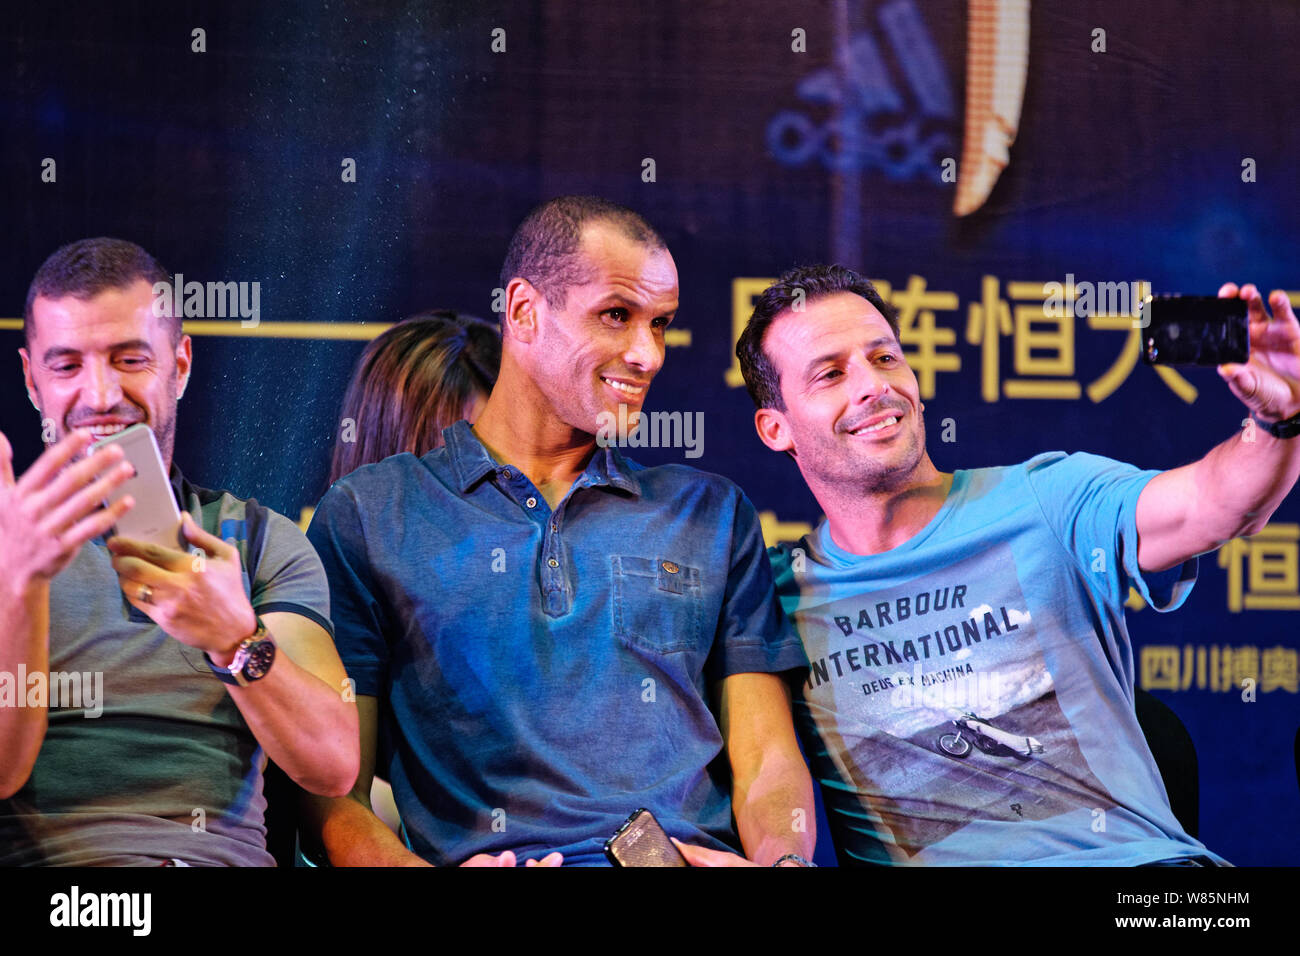 (From left) Portuguese soccer star Simao Sabrosa, Brazilian soccer star Rivaldo and French soccer star Ludovic Giuly attend a fan meeting event in Che Stock Photo